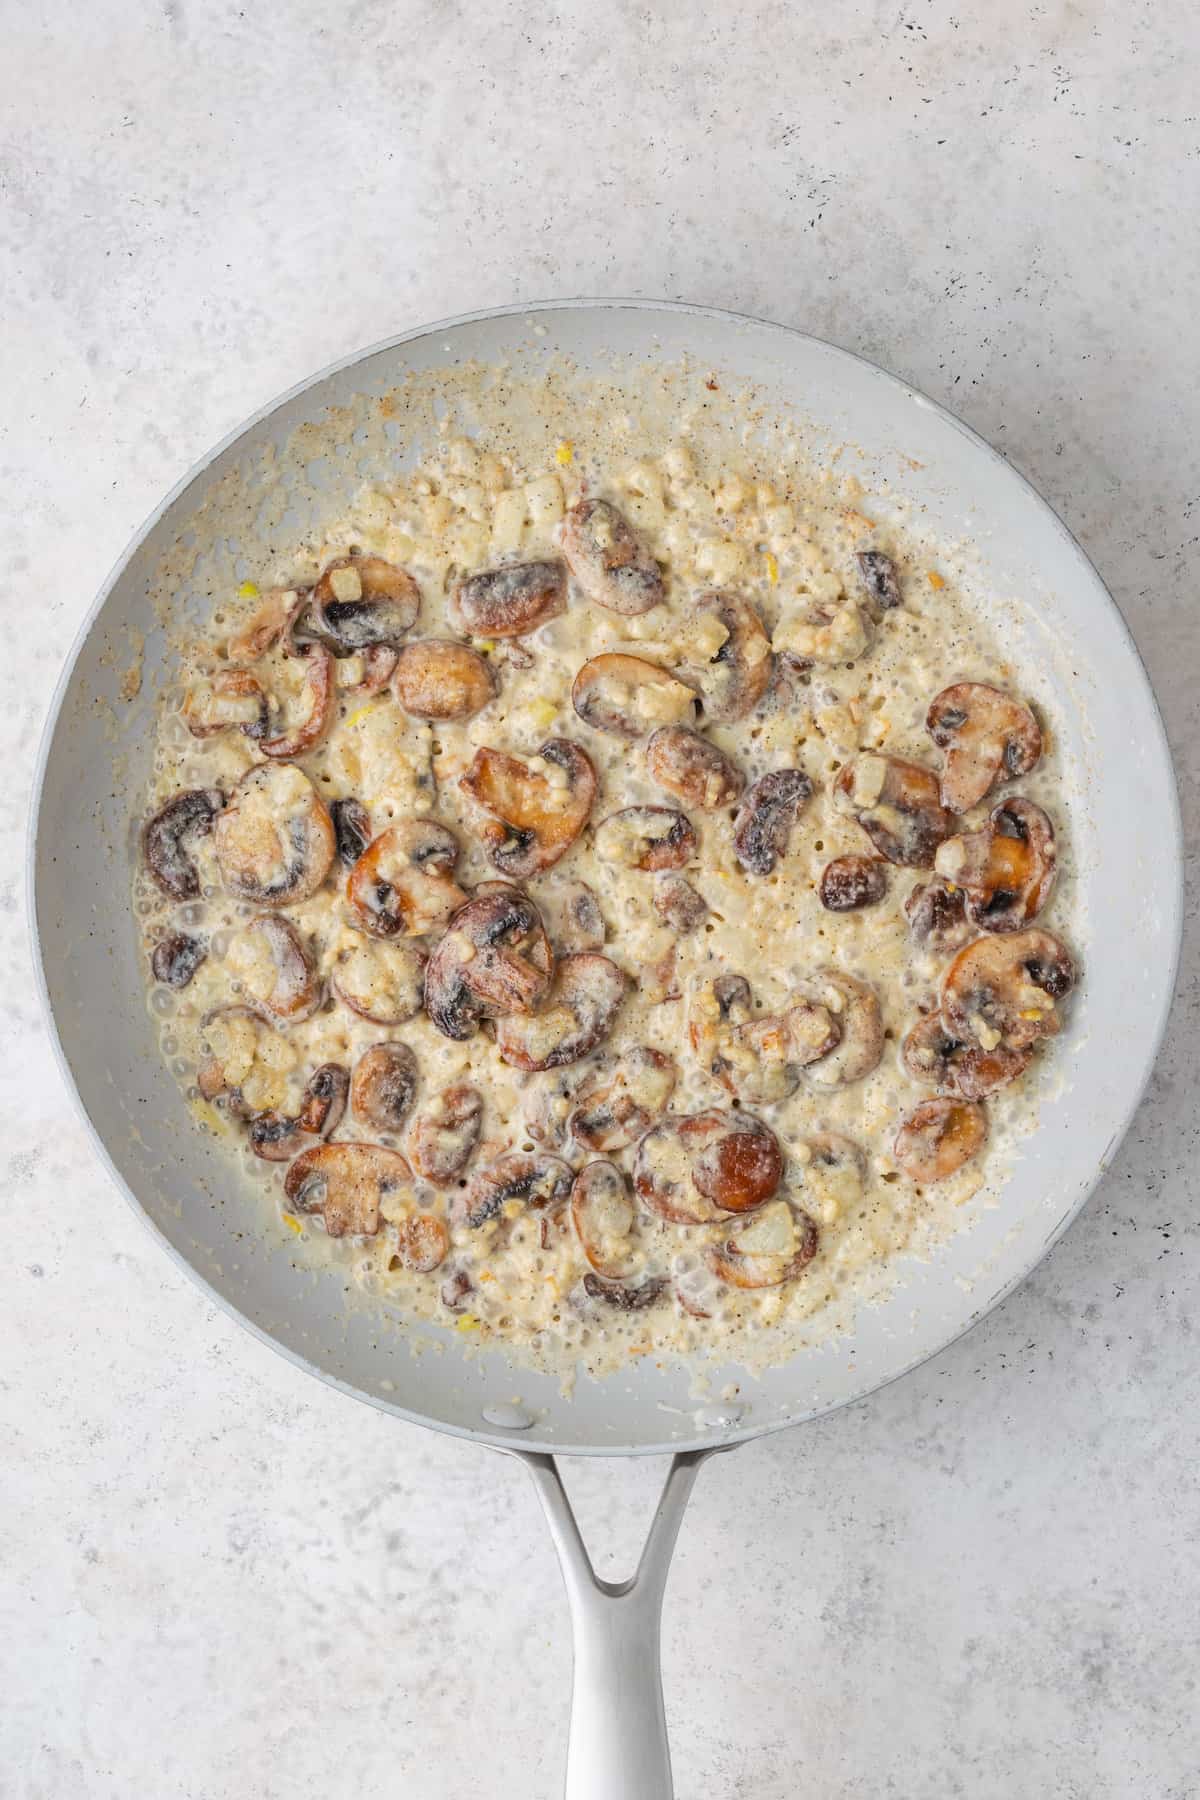 Cooked mushrooms in a skillet with a thickening sauce.